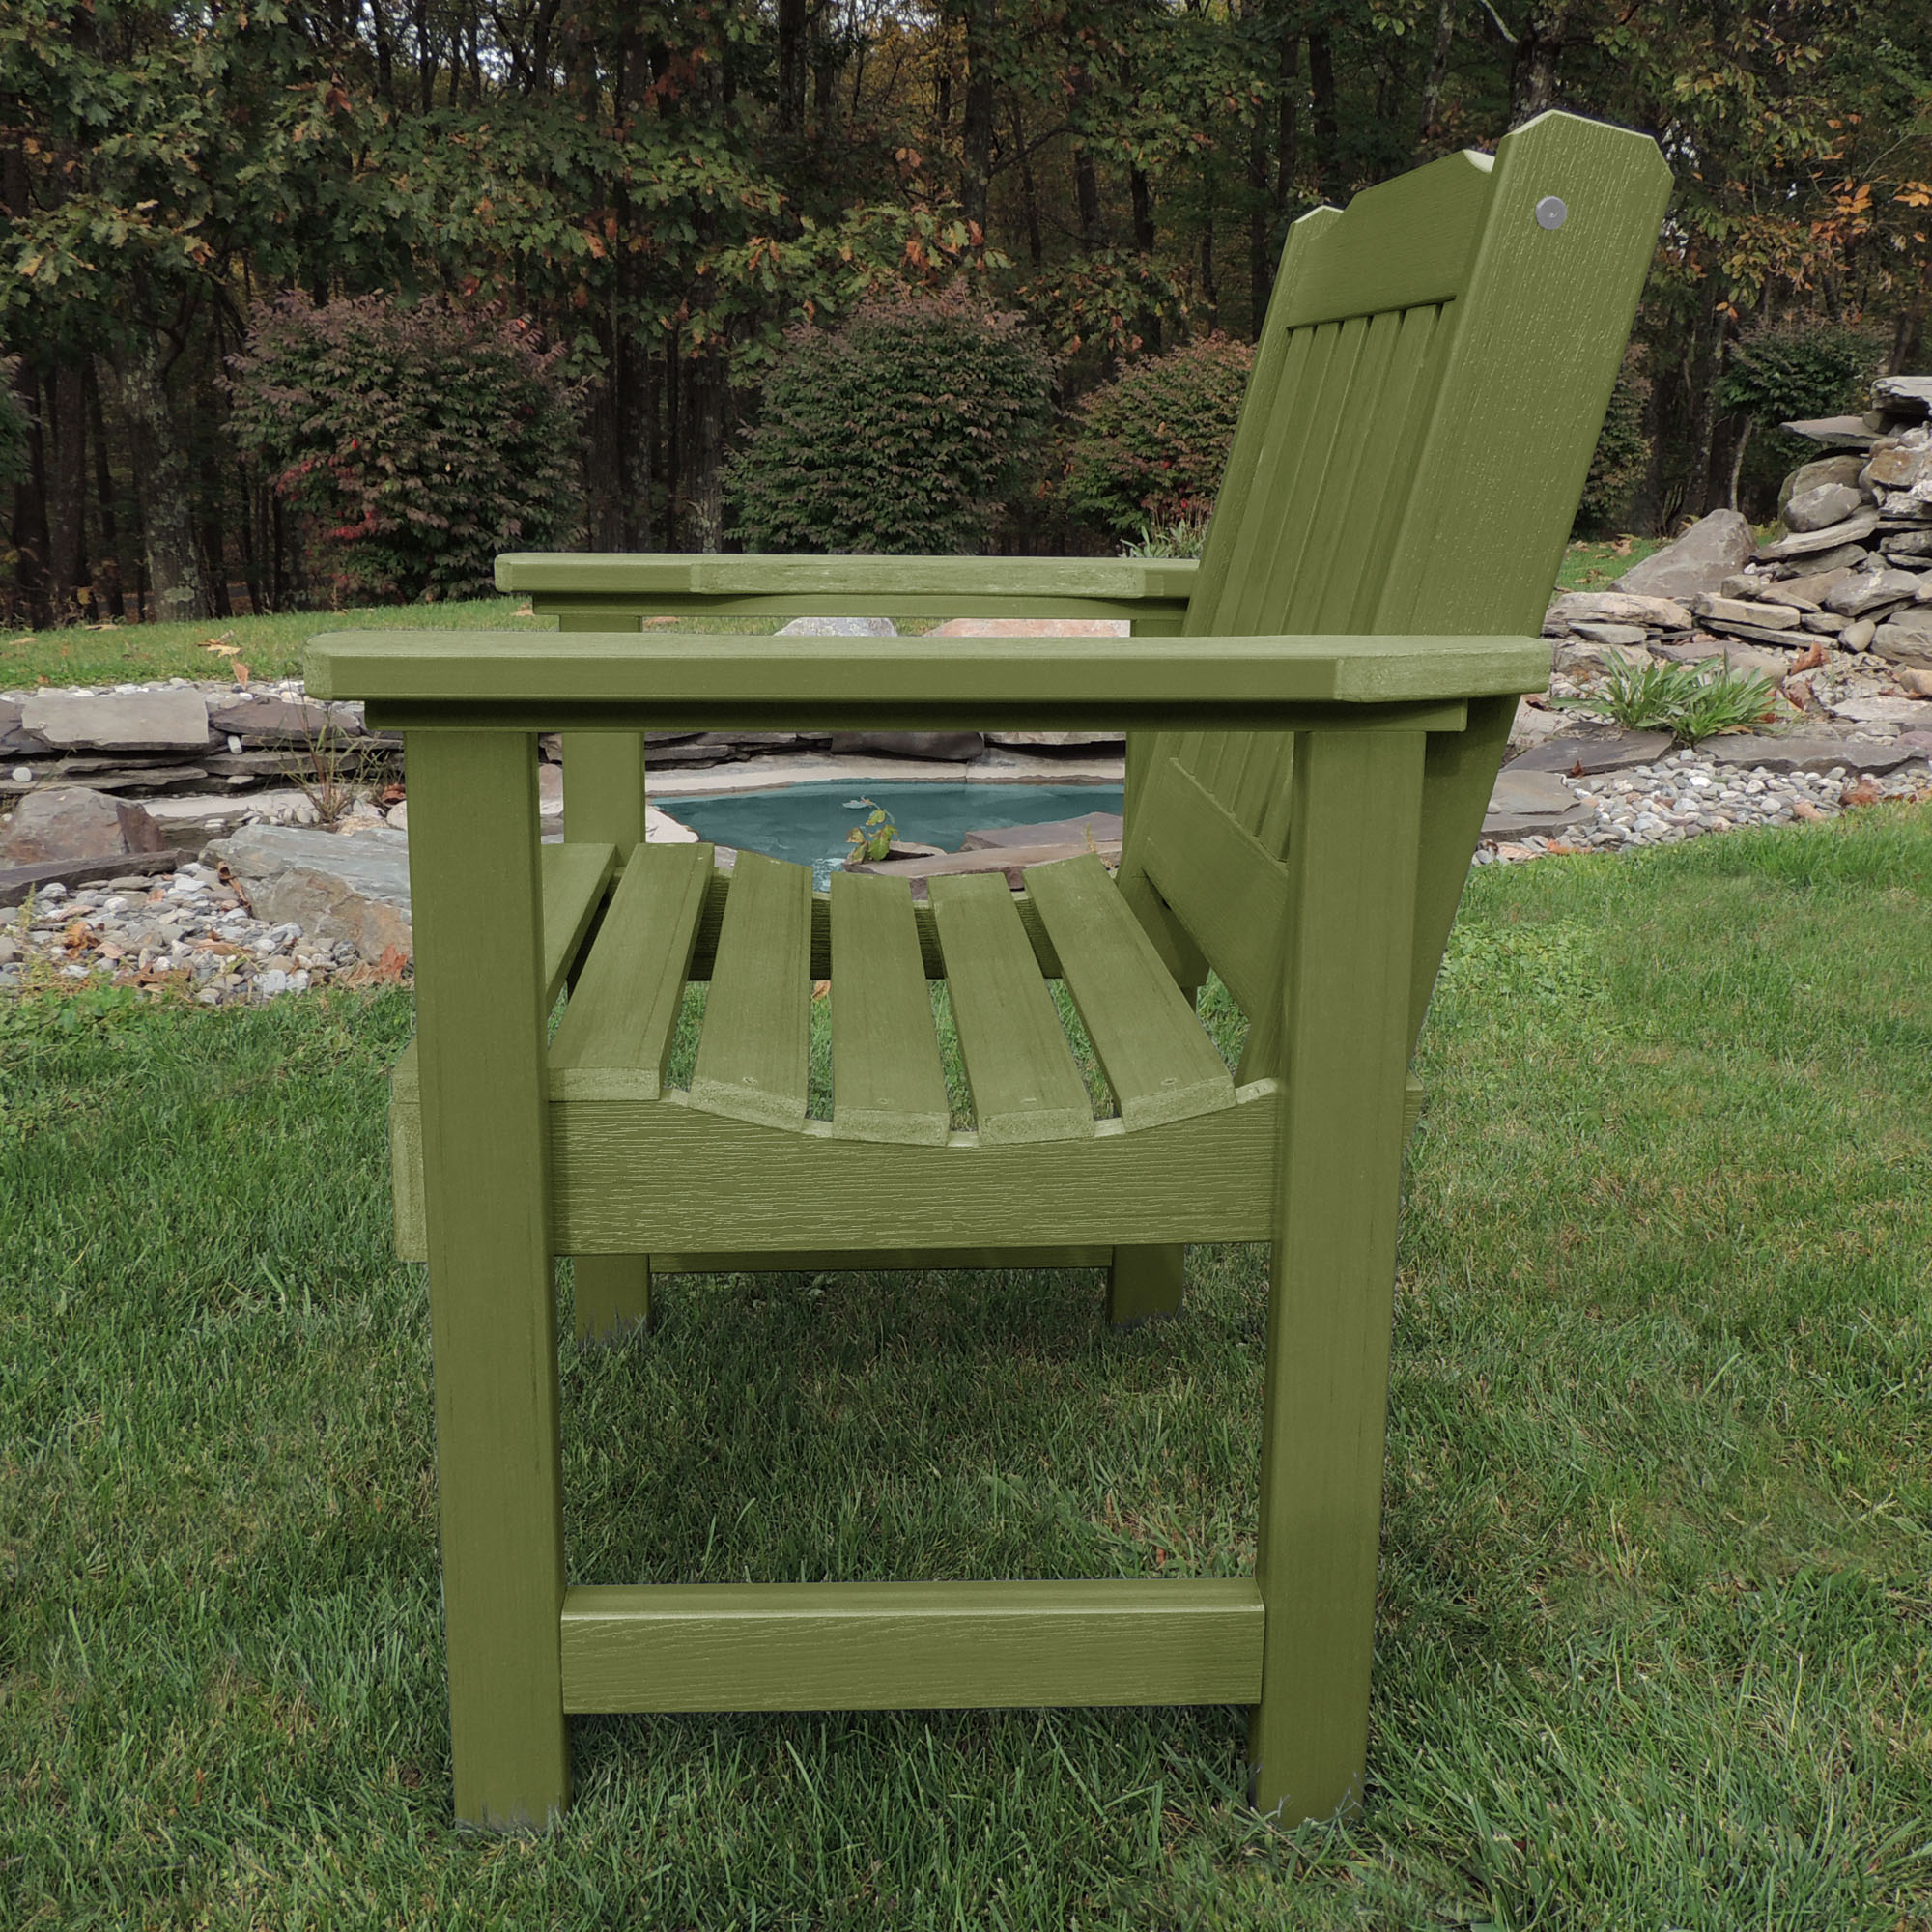 2 Lehigh Garden Chairs with 1 Square Side Table - image 5 of 16